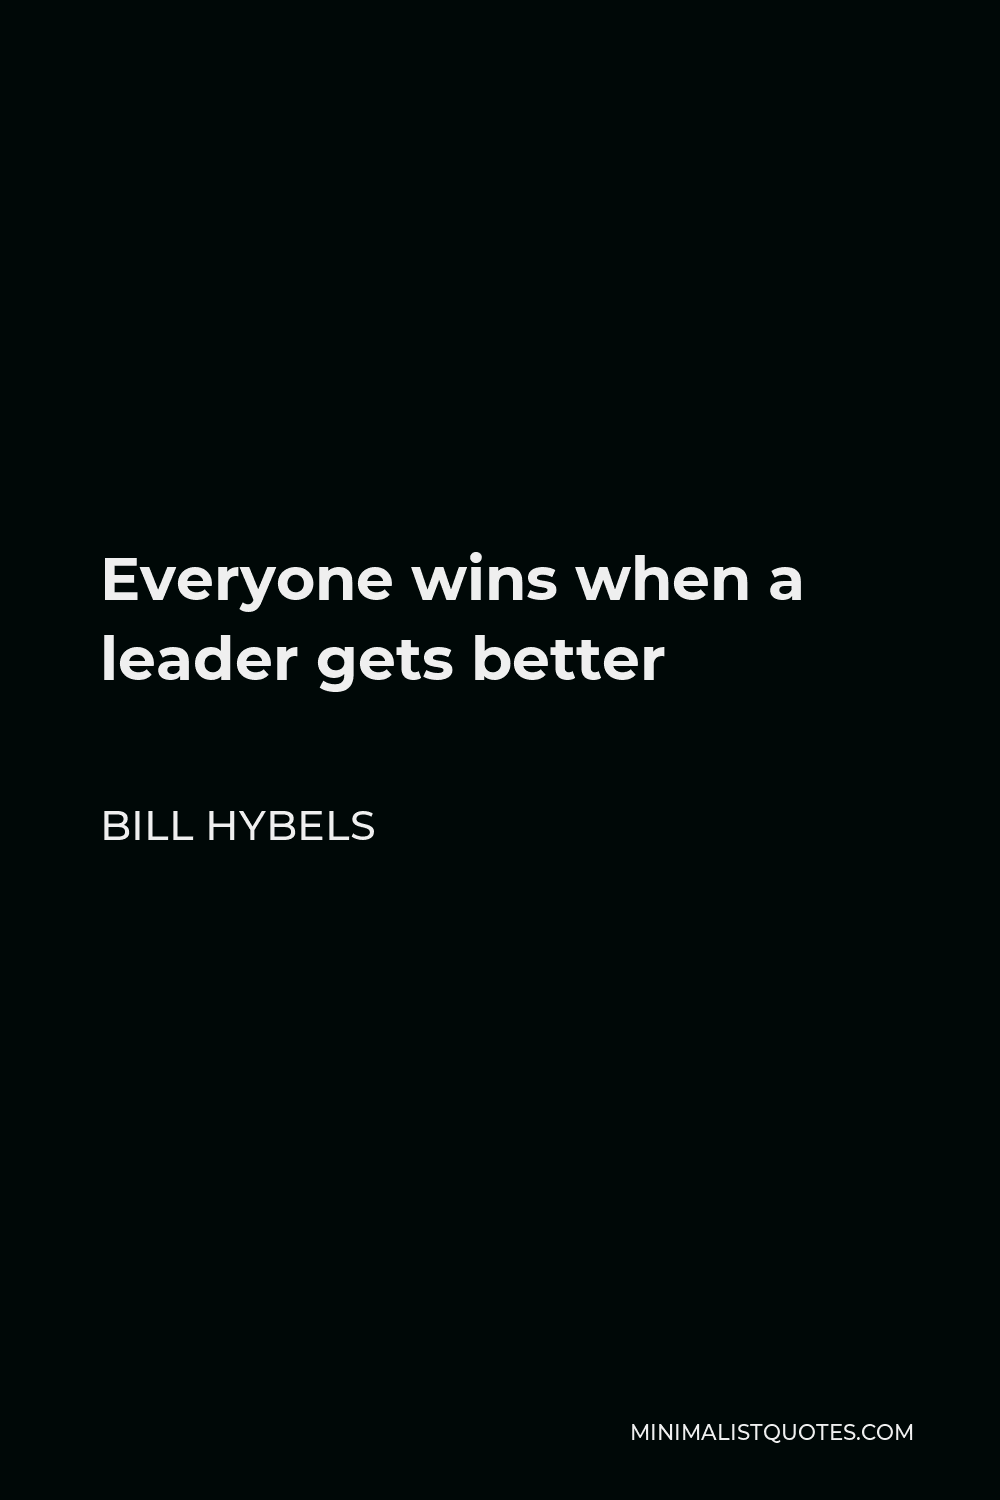 Bill Hybels Quote - Everyone wins when a leader gets better